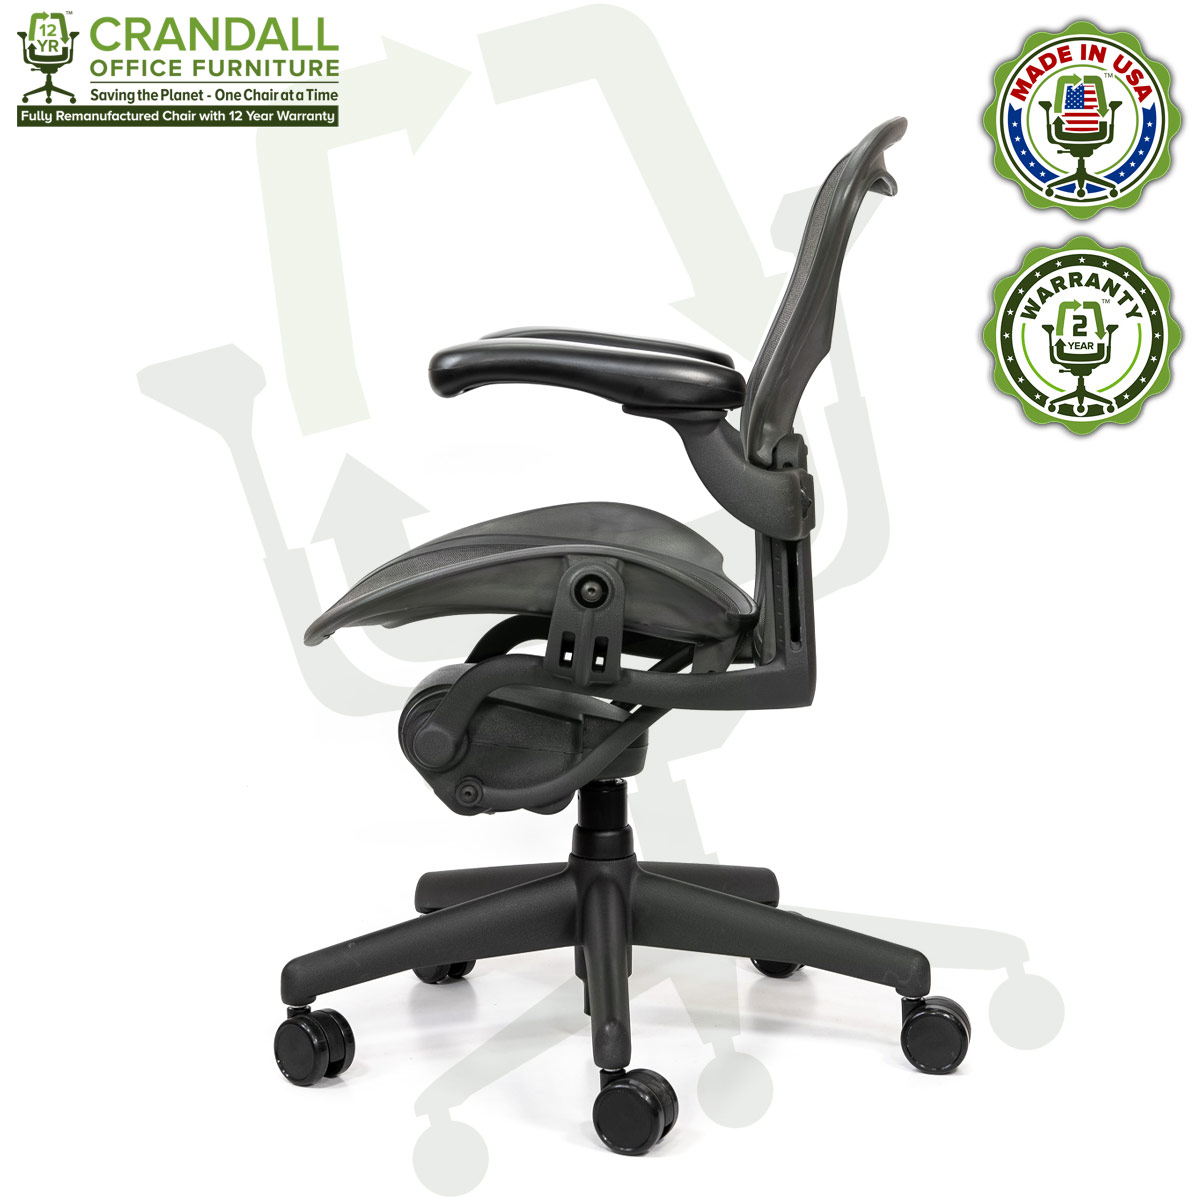 Crandall Office Refurbished Herman Miller Aeron Chair - Size A - 0003